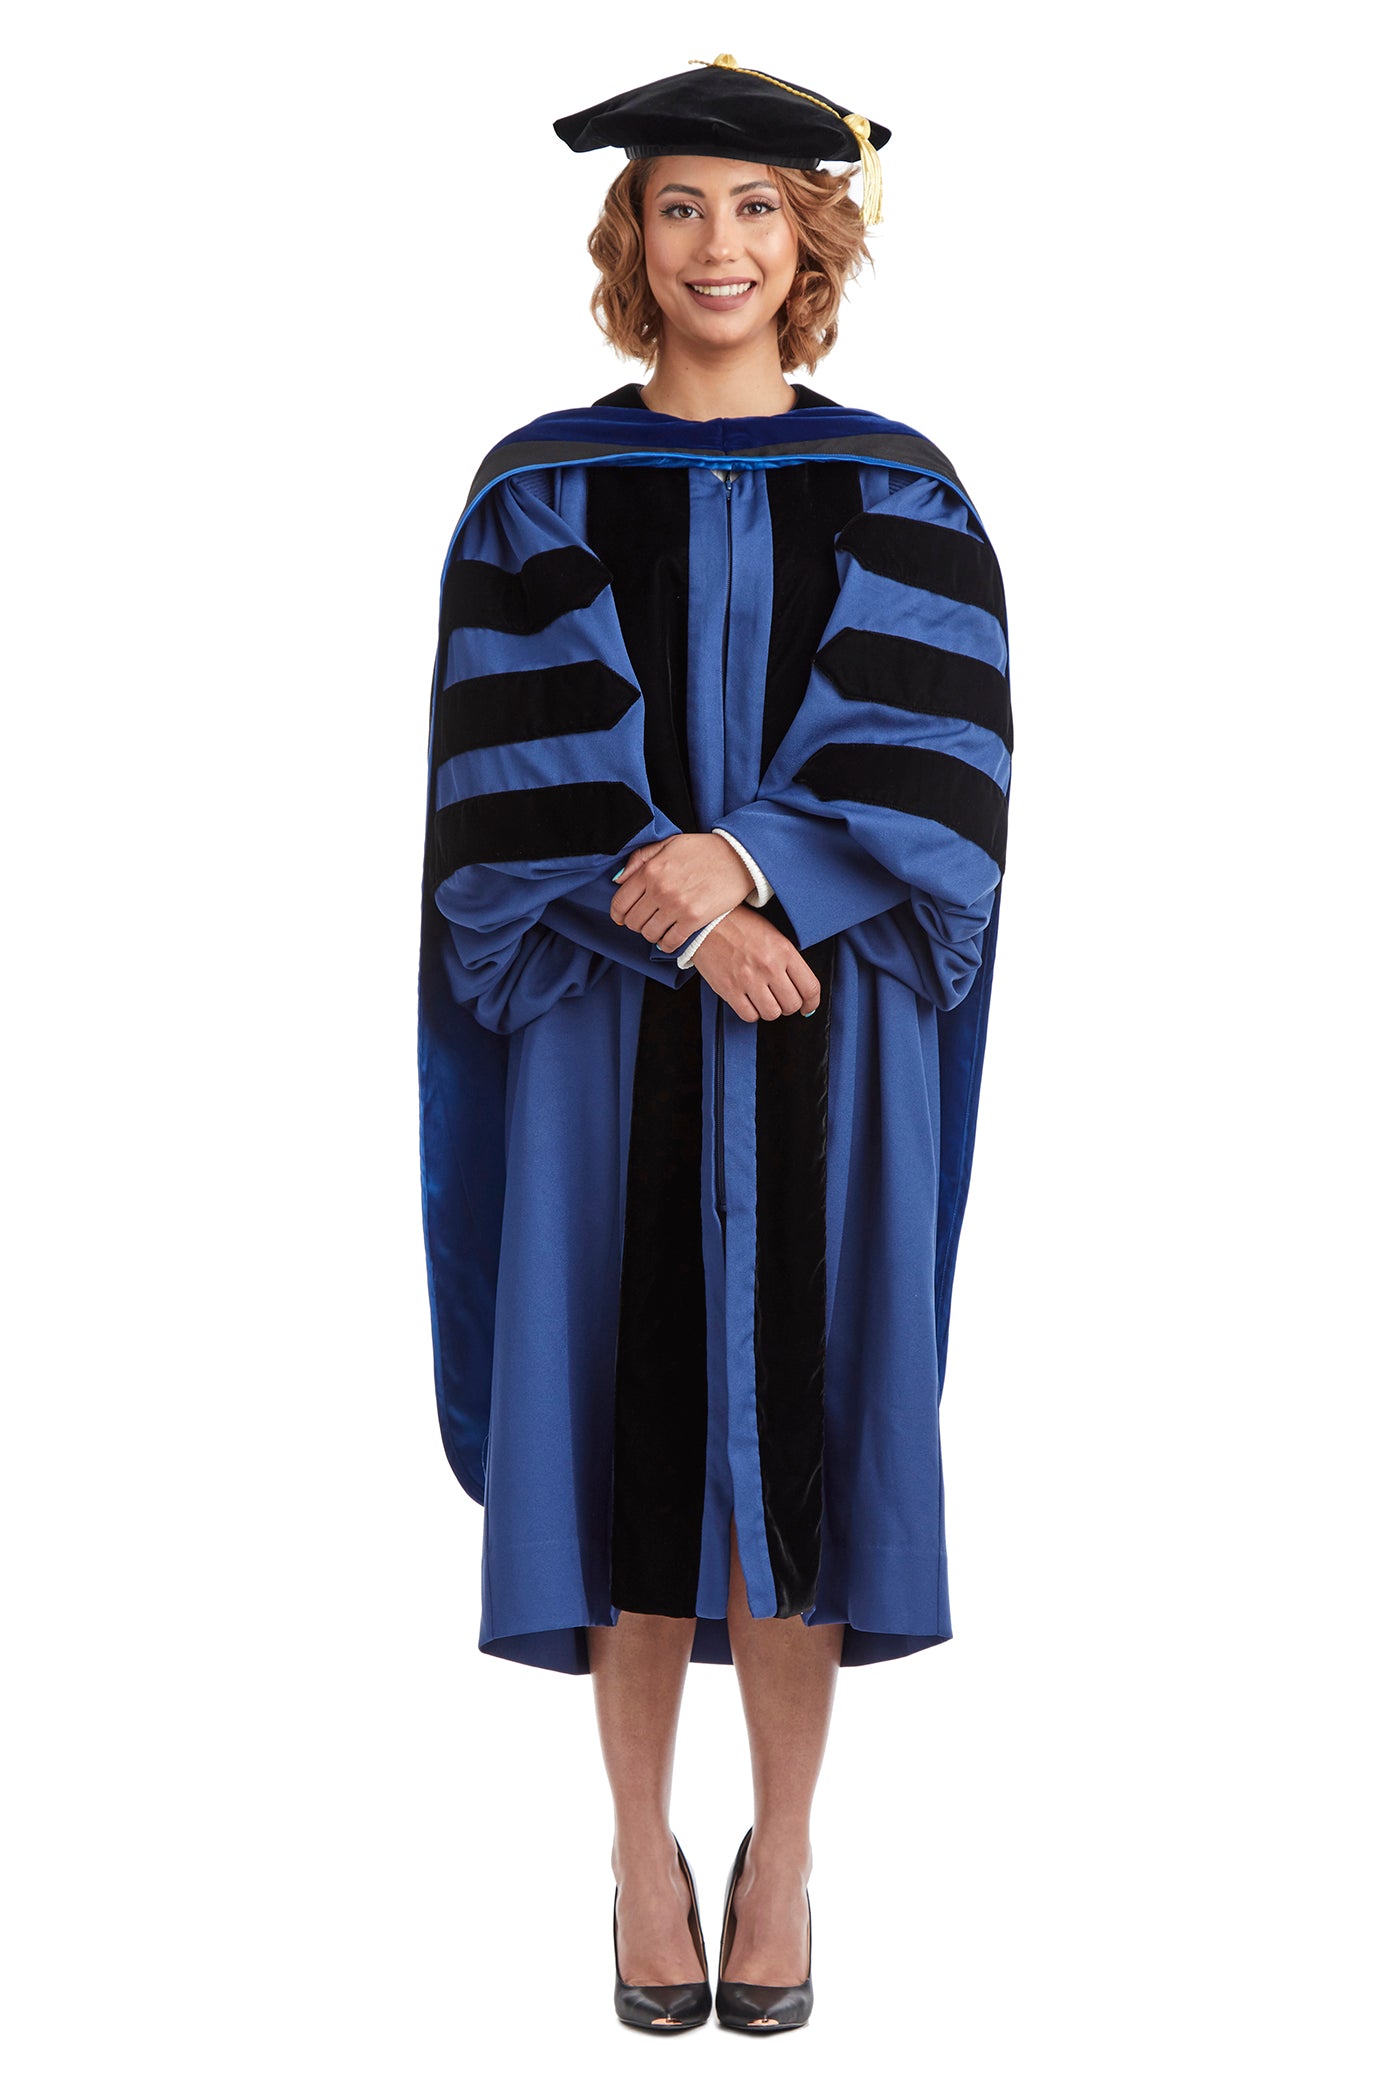 yale phd cap and gown